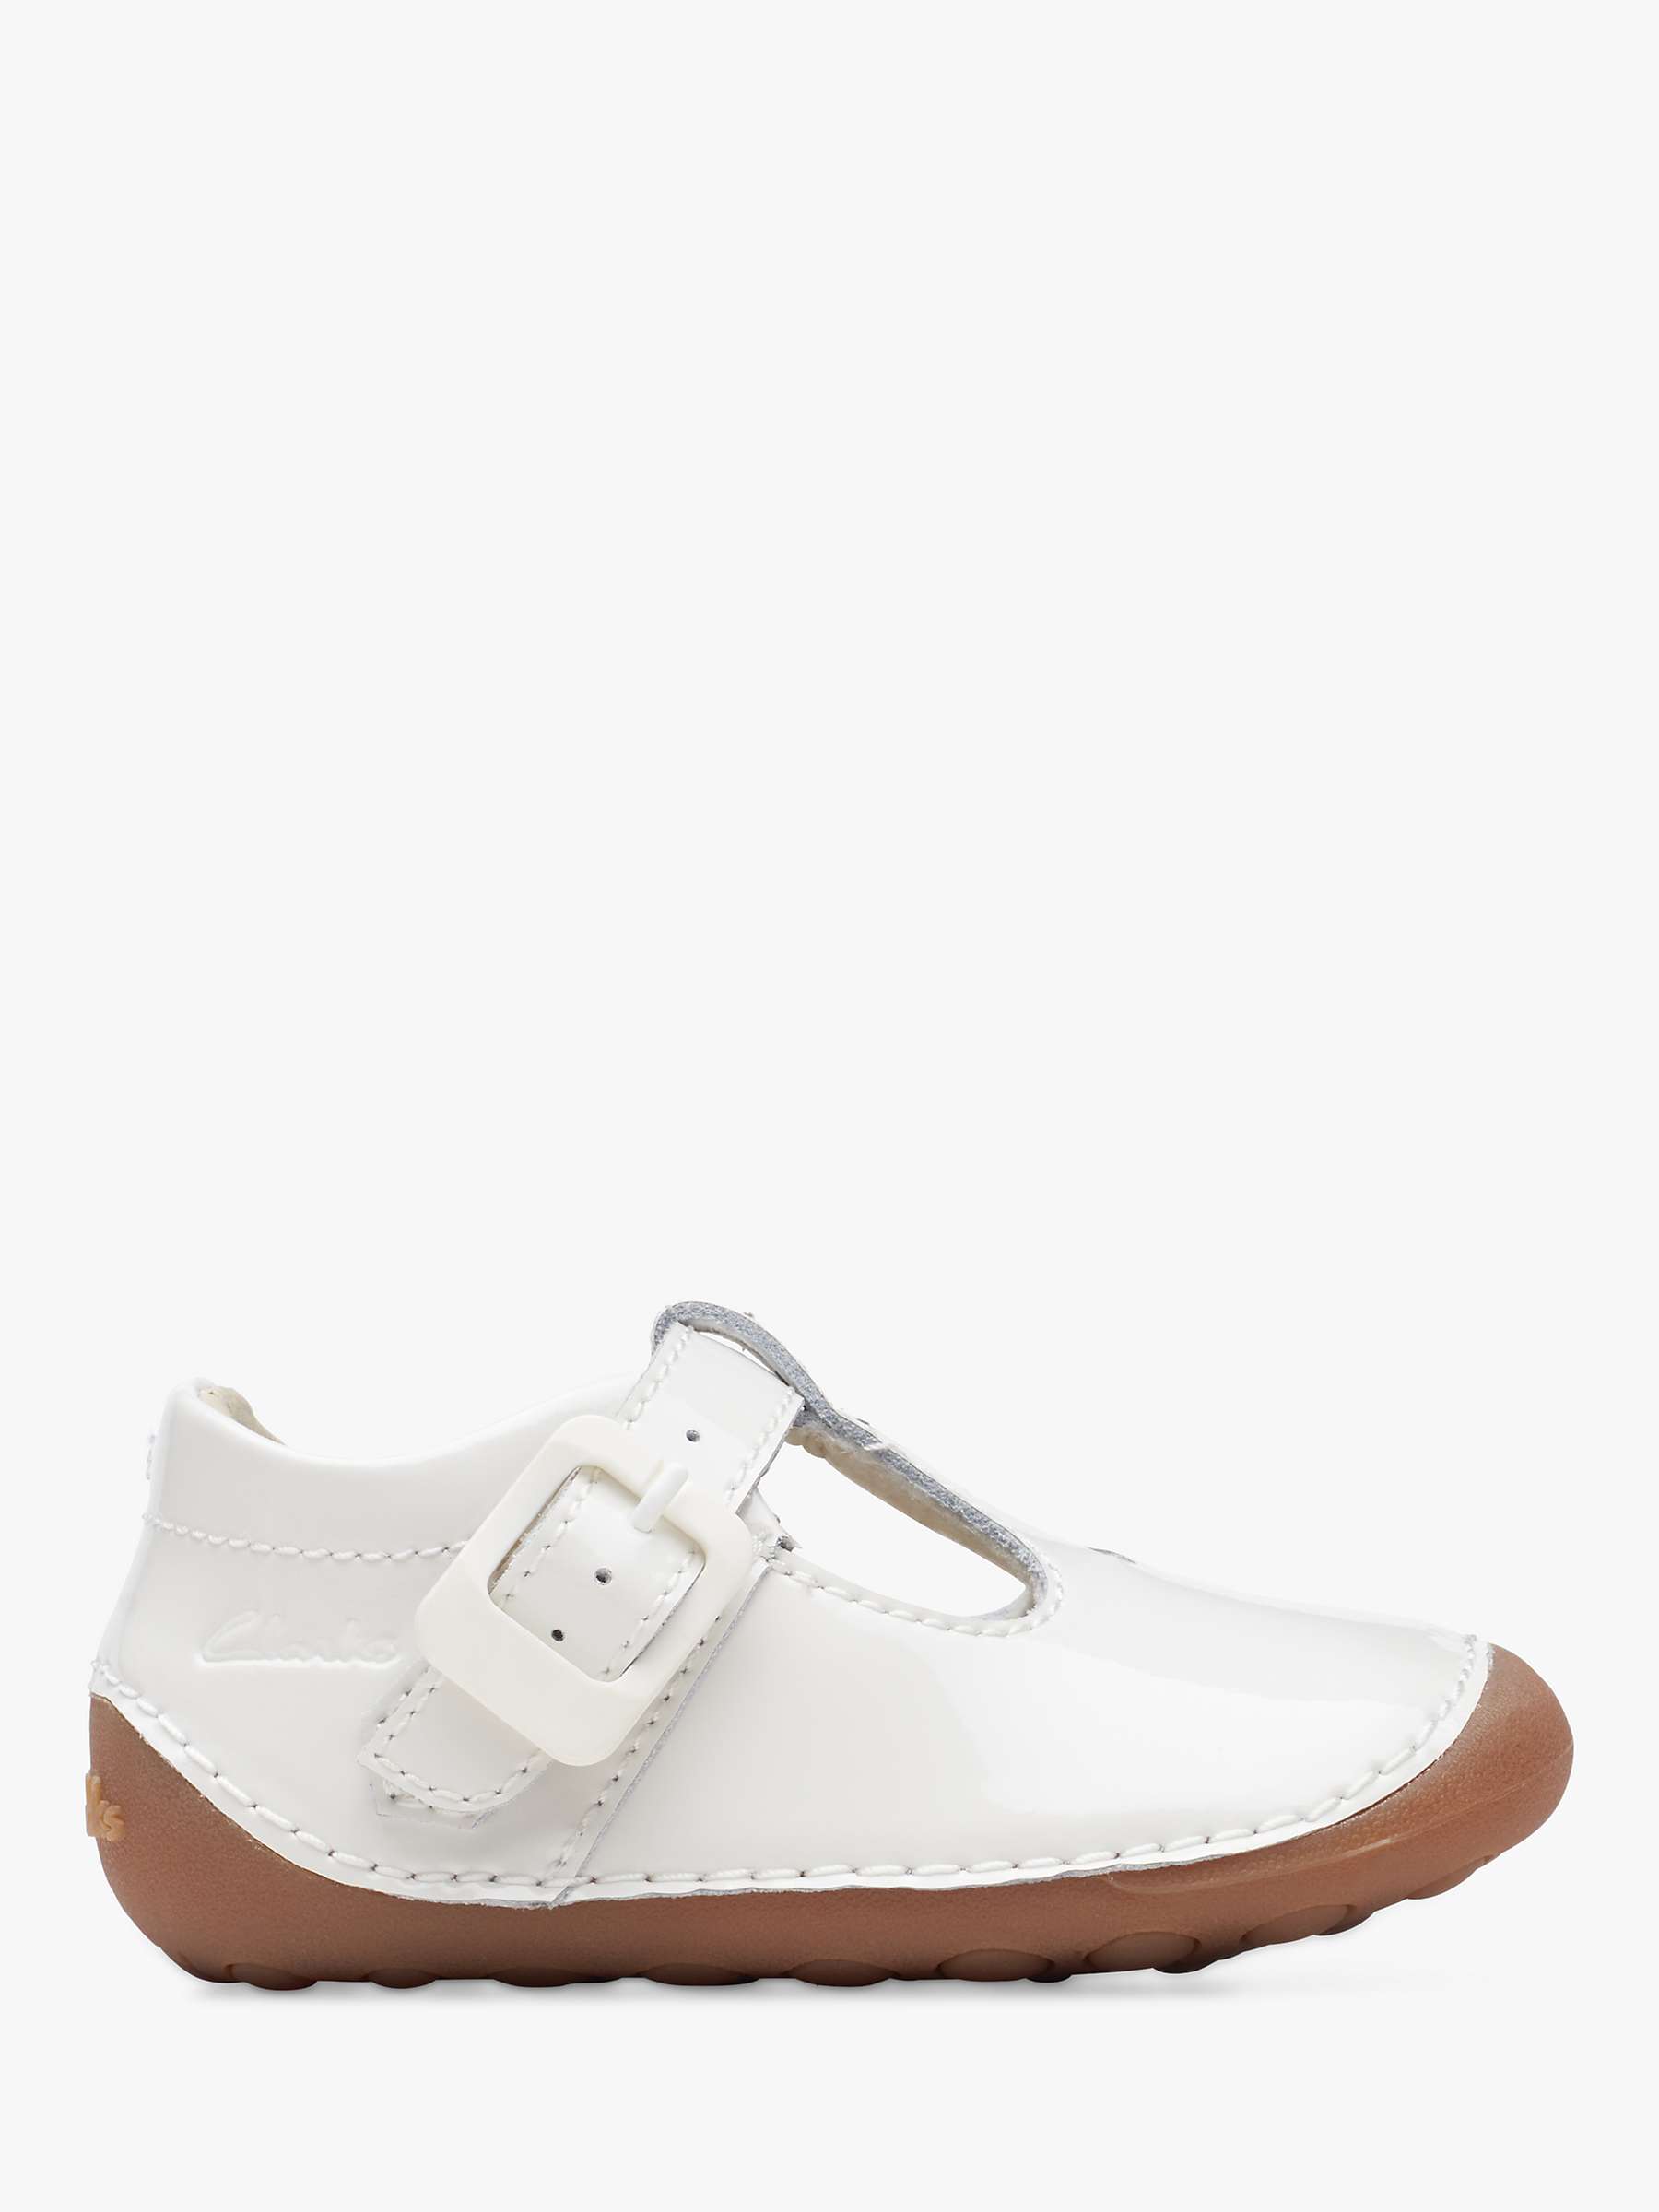 Buy Clarks Baby Tiny Beat Patent Buckle Shoes, White Online at johnlewis.com